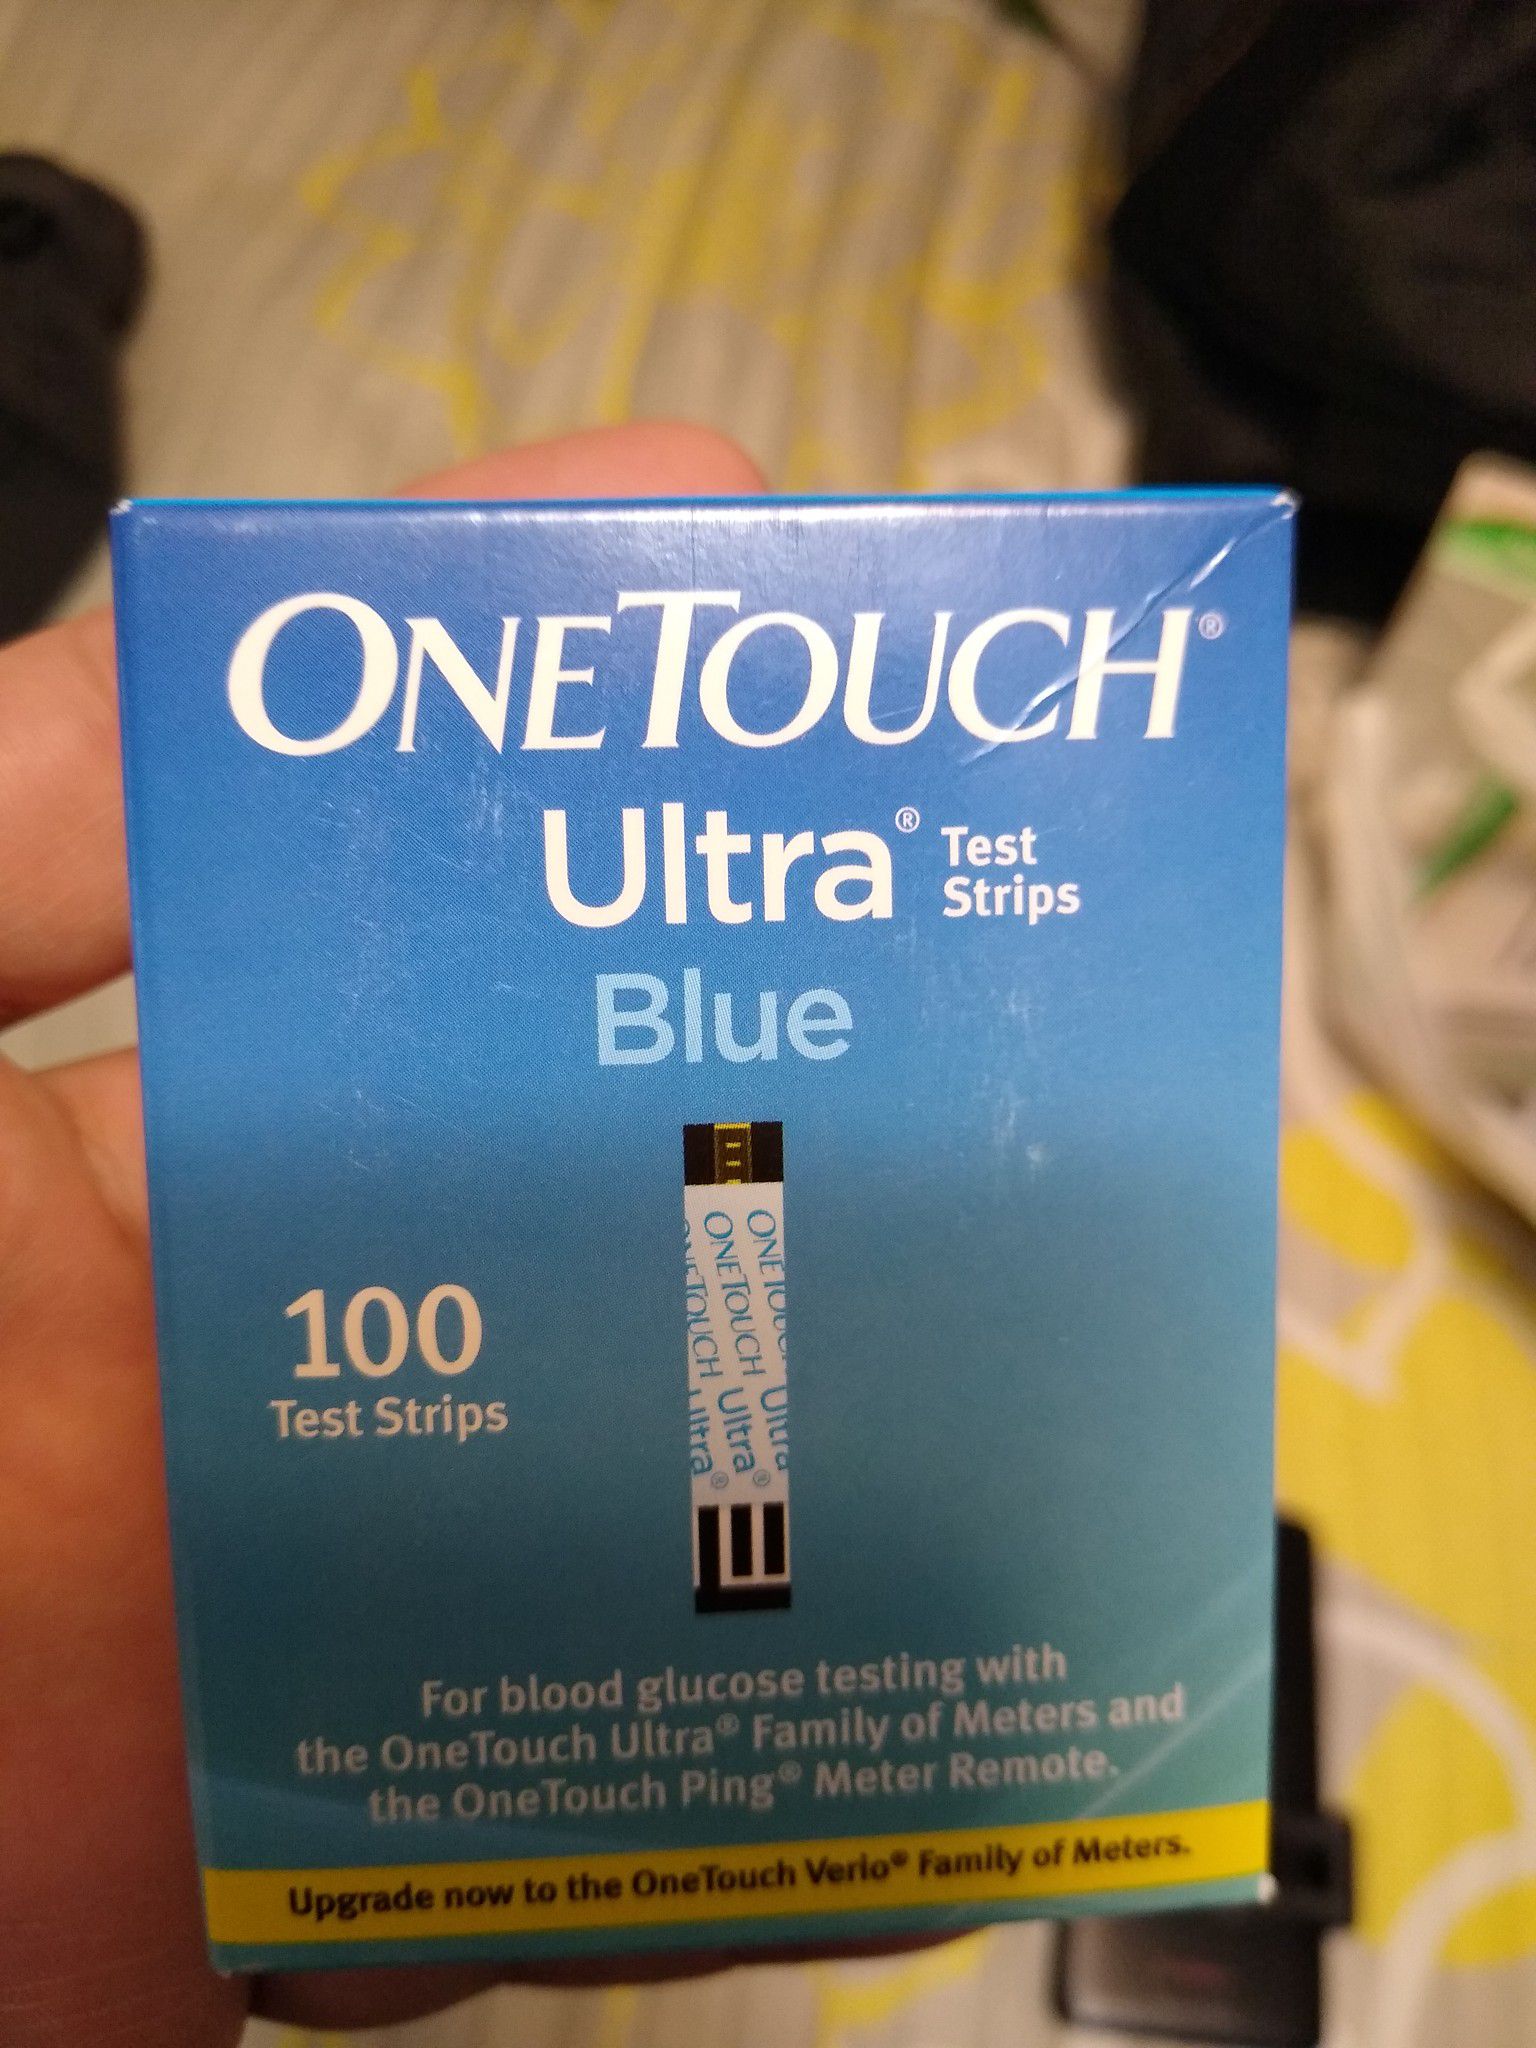 ONETOUCH ULTRA NEW 100 BOX ONLY $65.00 cash LOOK AT THE PICTURE NEW DATE